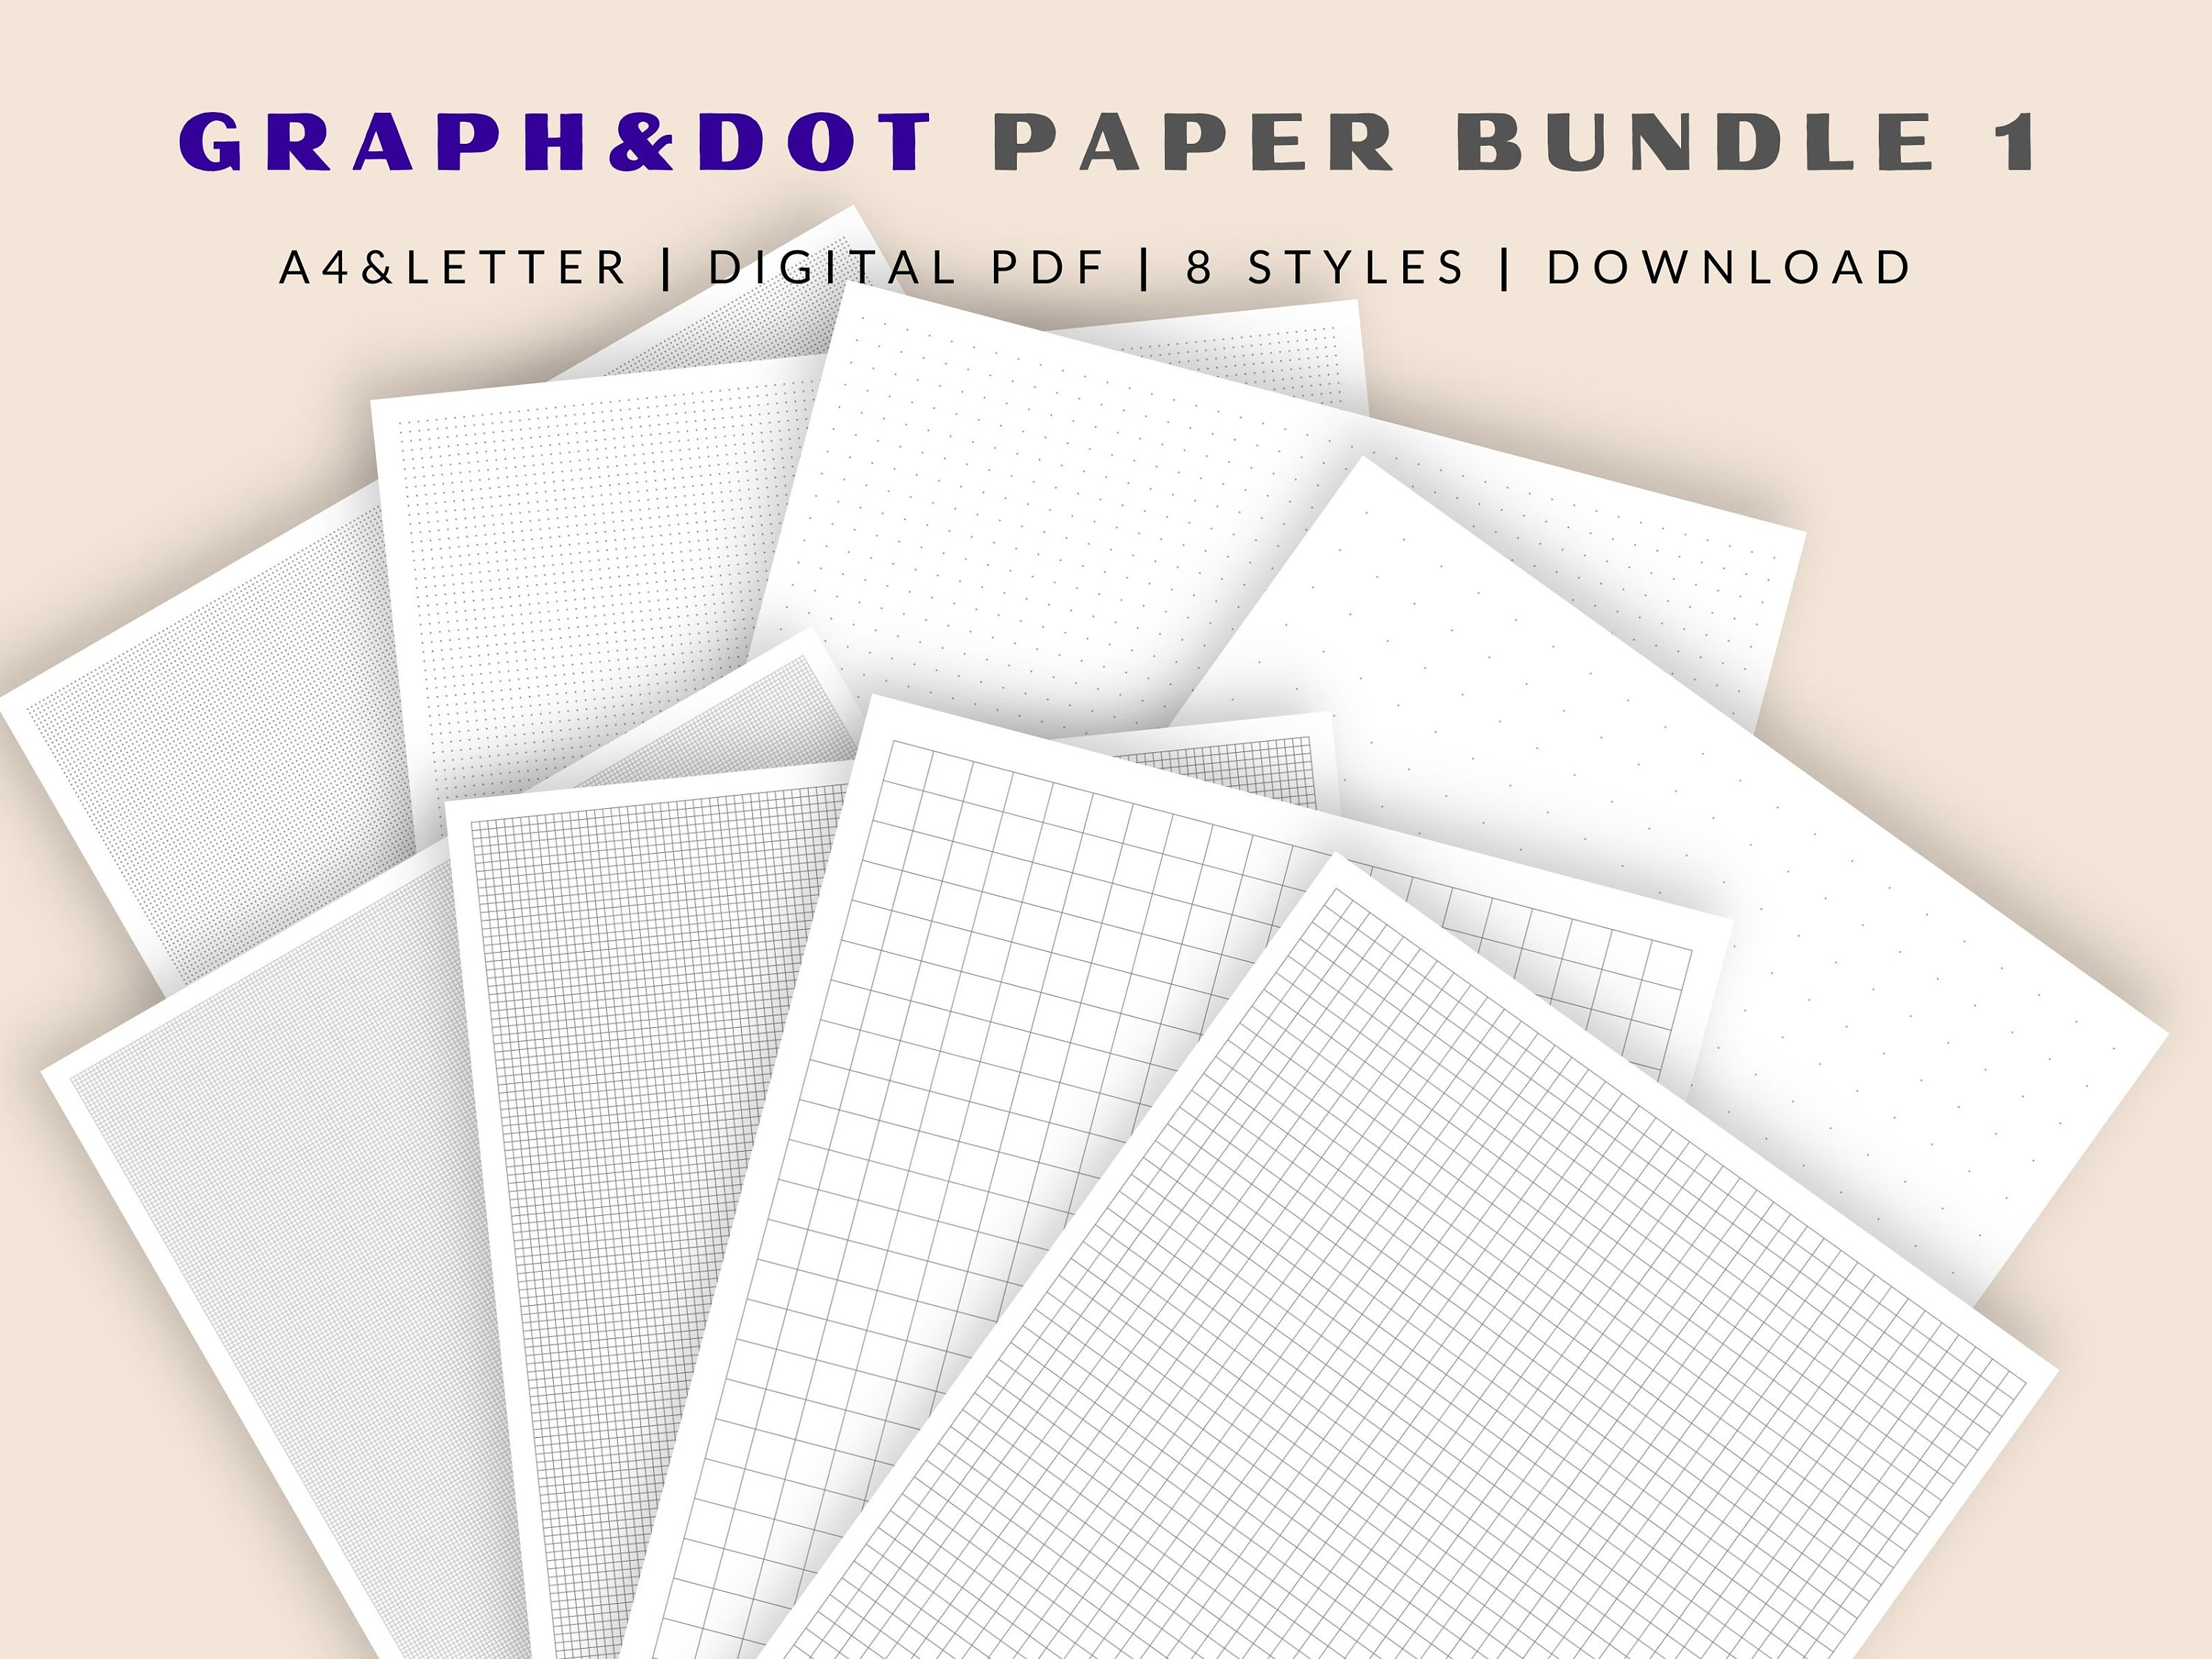 Digital Graph Grid Paper for Procreate for Drafting/drawing